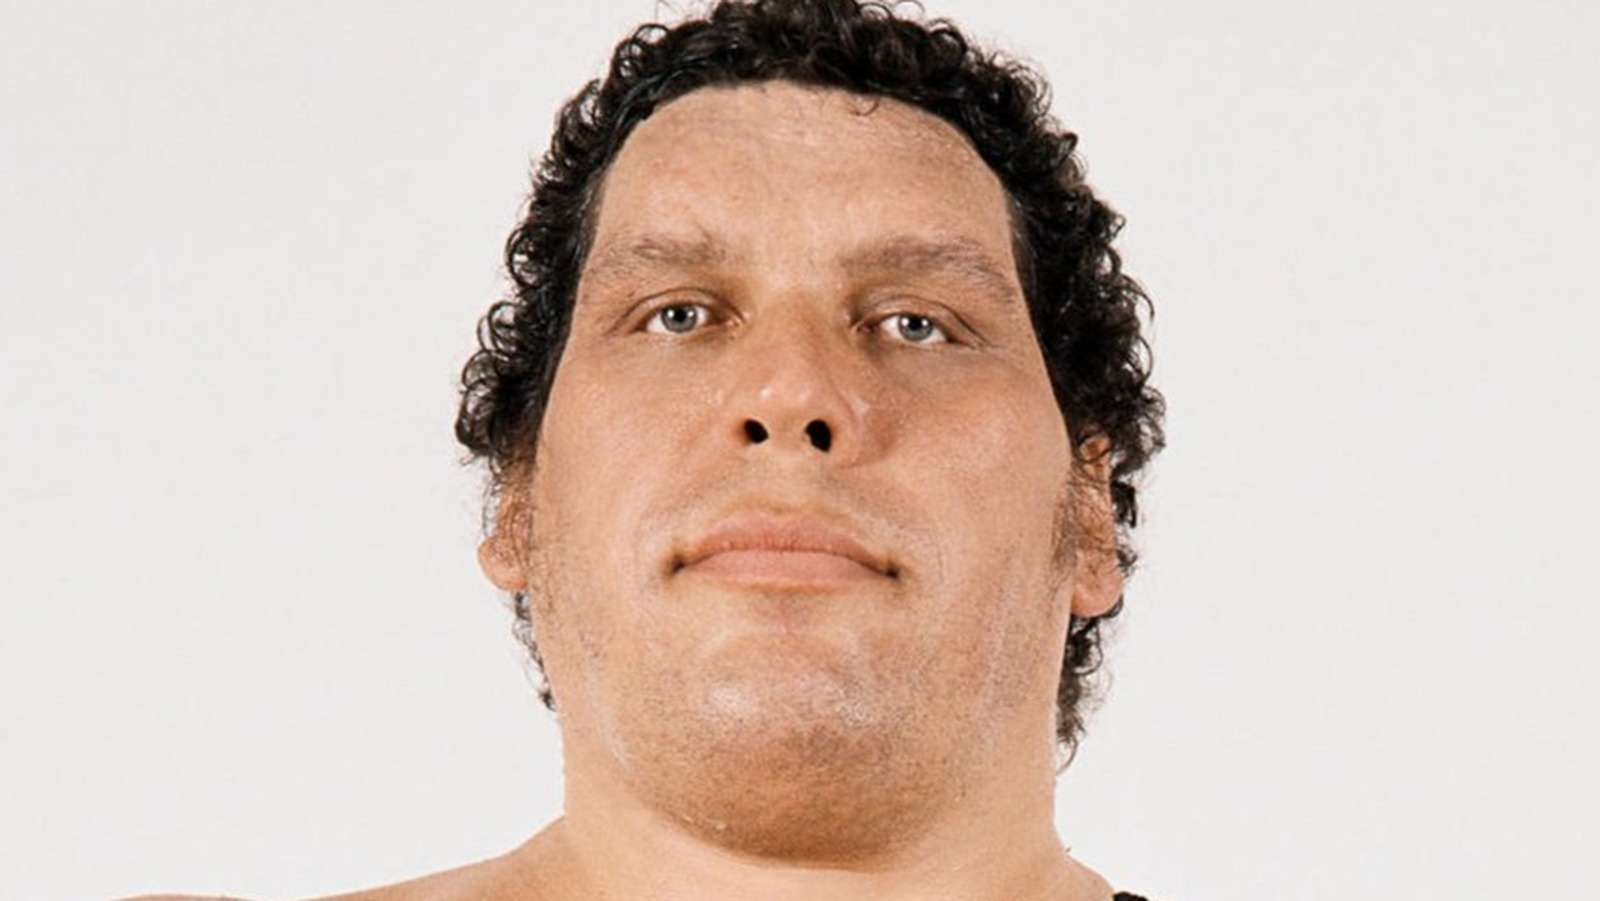 Wrestlers We Would Have Loved To See Andre The Giant Match Up Against